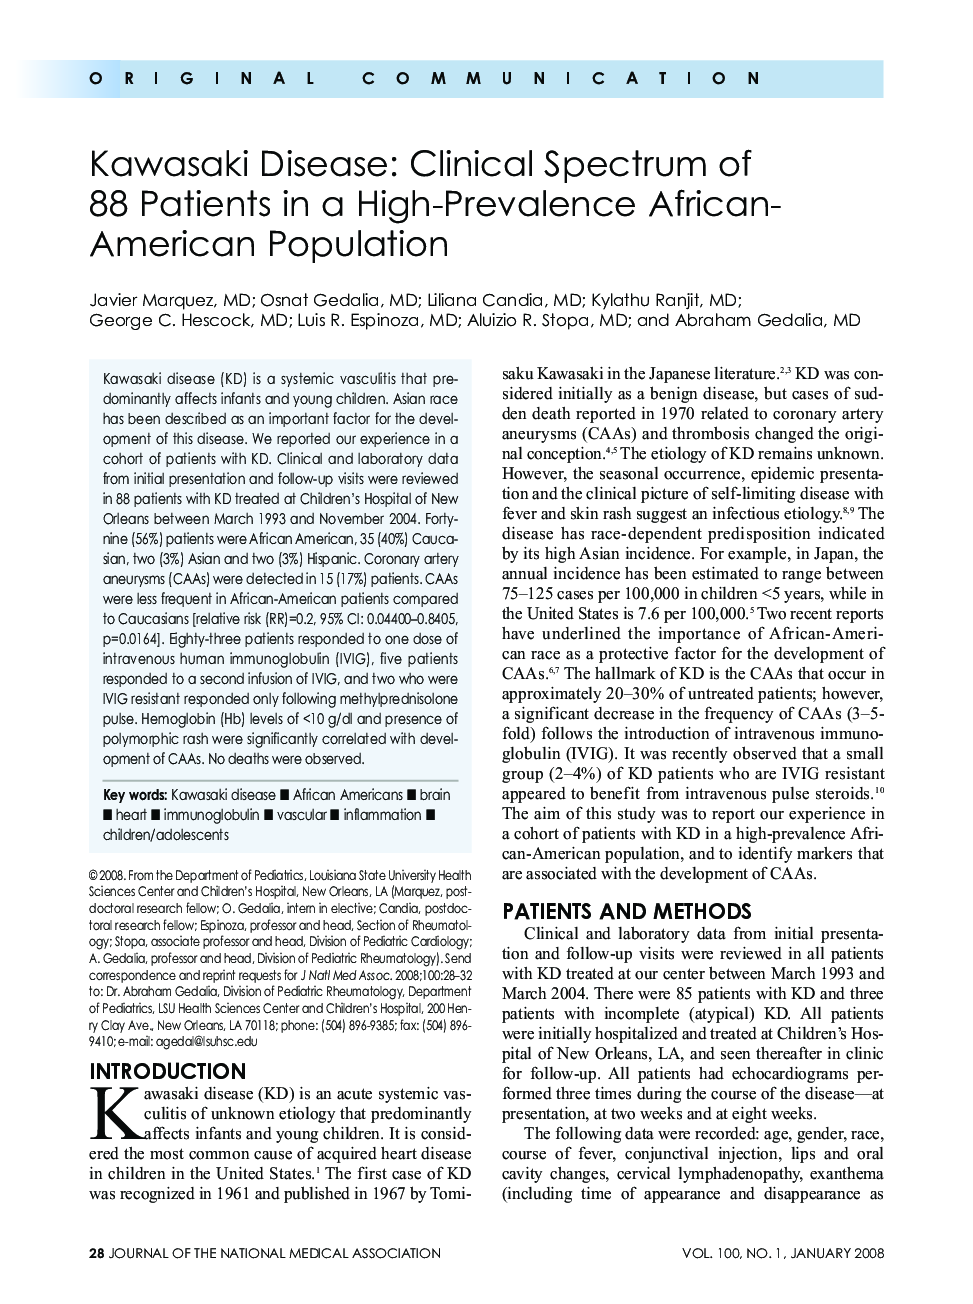 Kawasaki Disease: Clinical Spectrum of 88 Patients in a High-Prevalence African- American Population